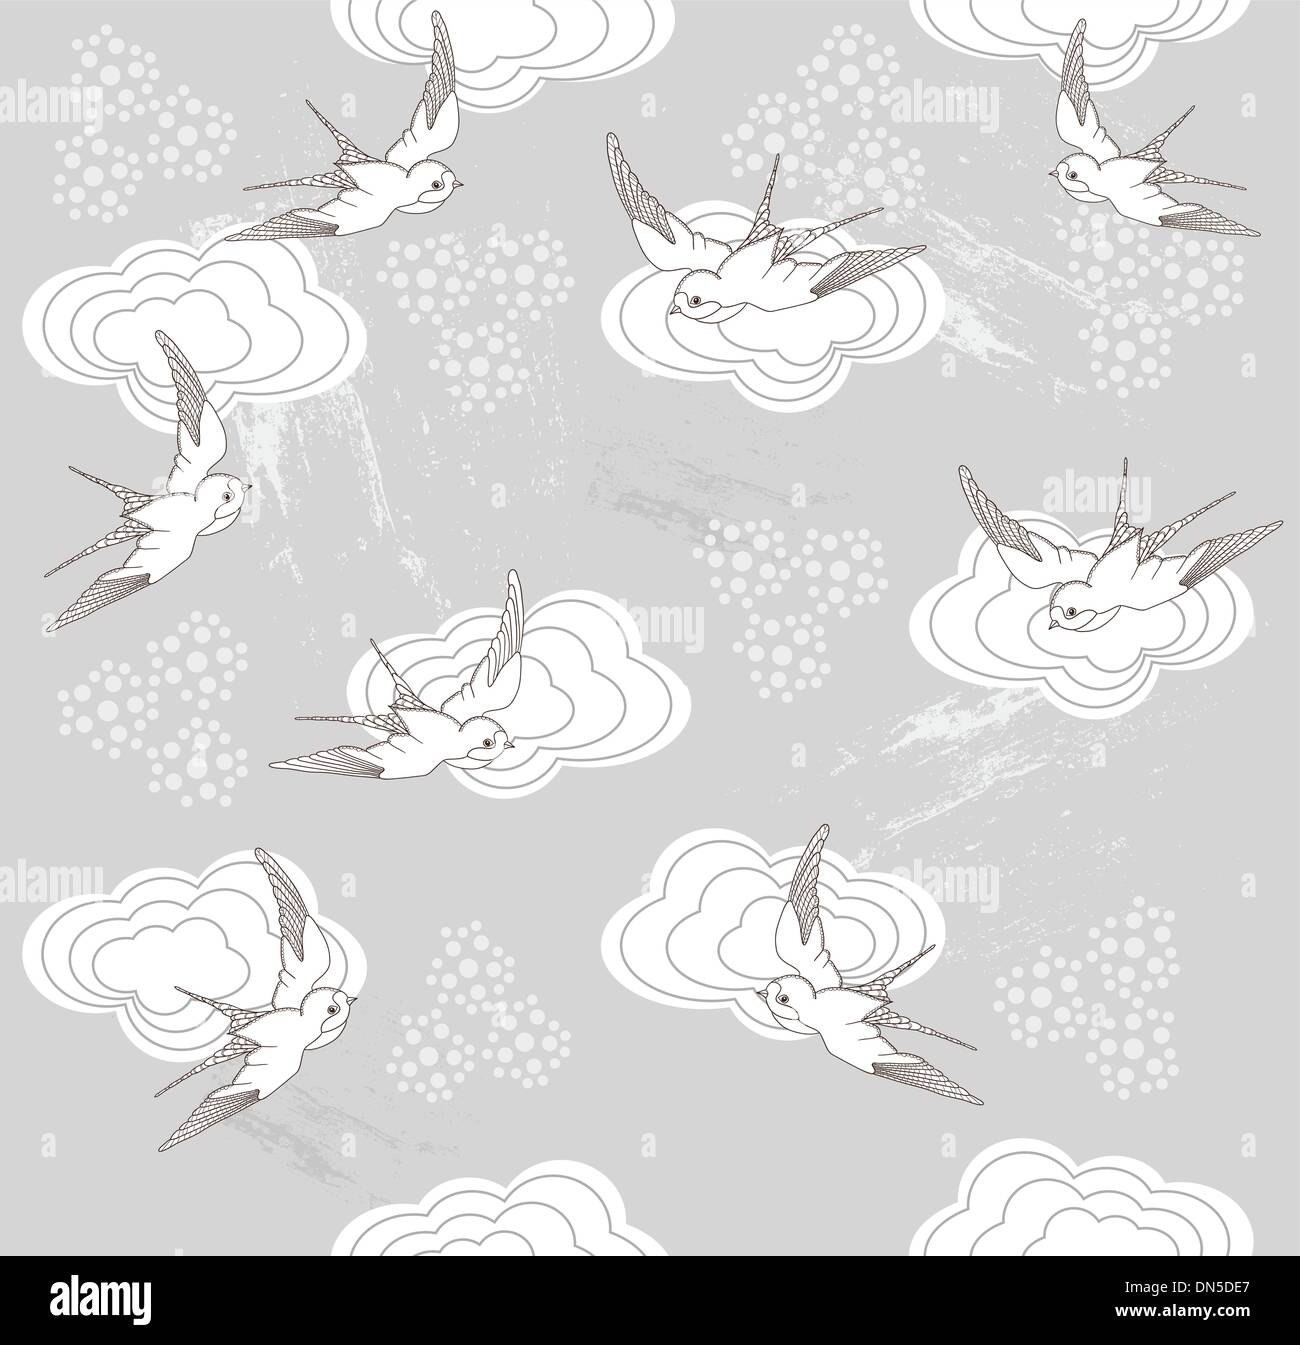 Cute seamless swallow and cloud pattern Stock Vector